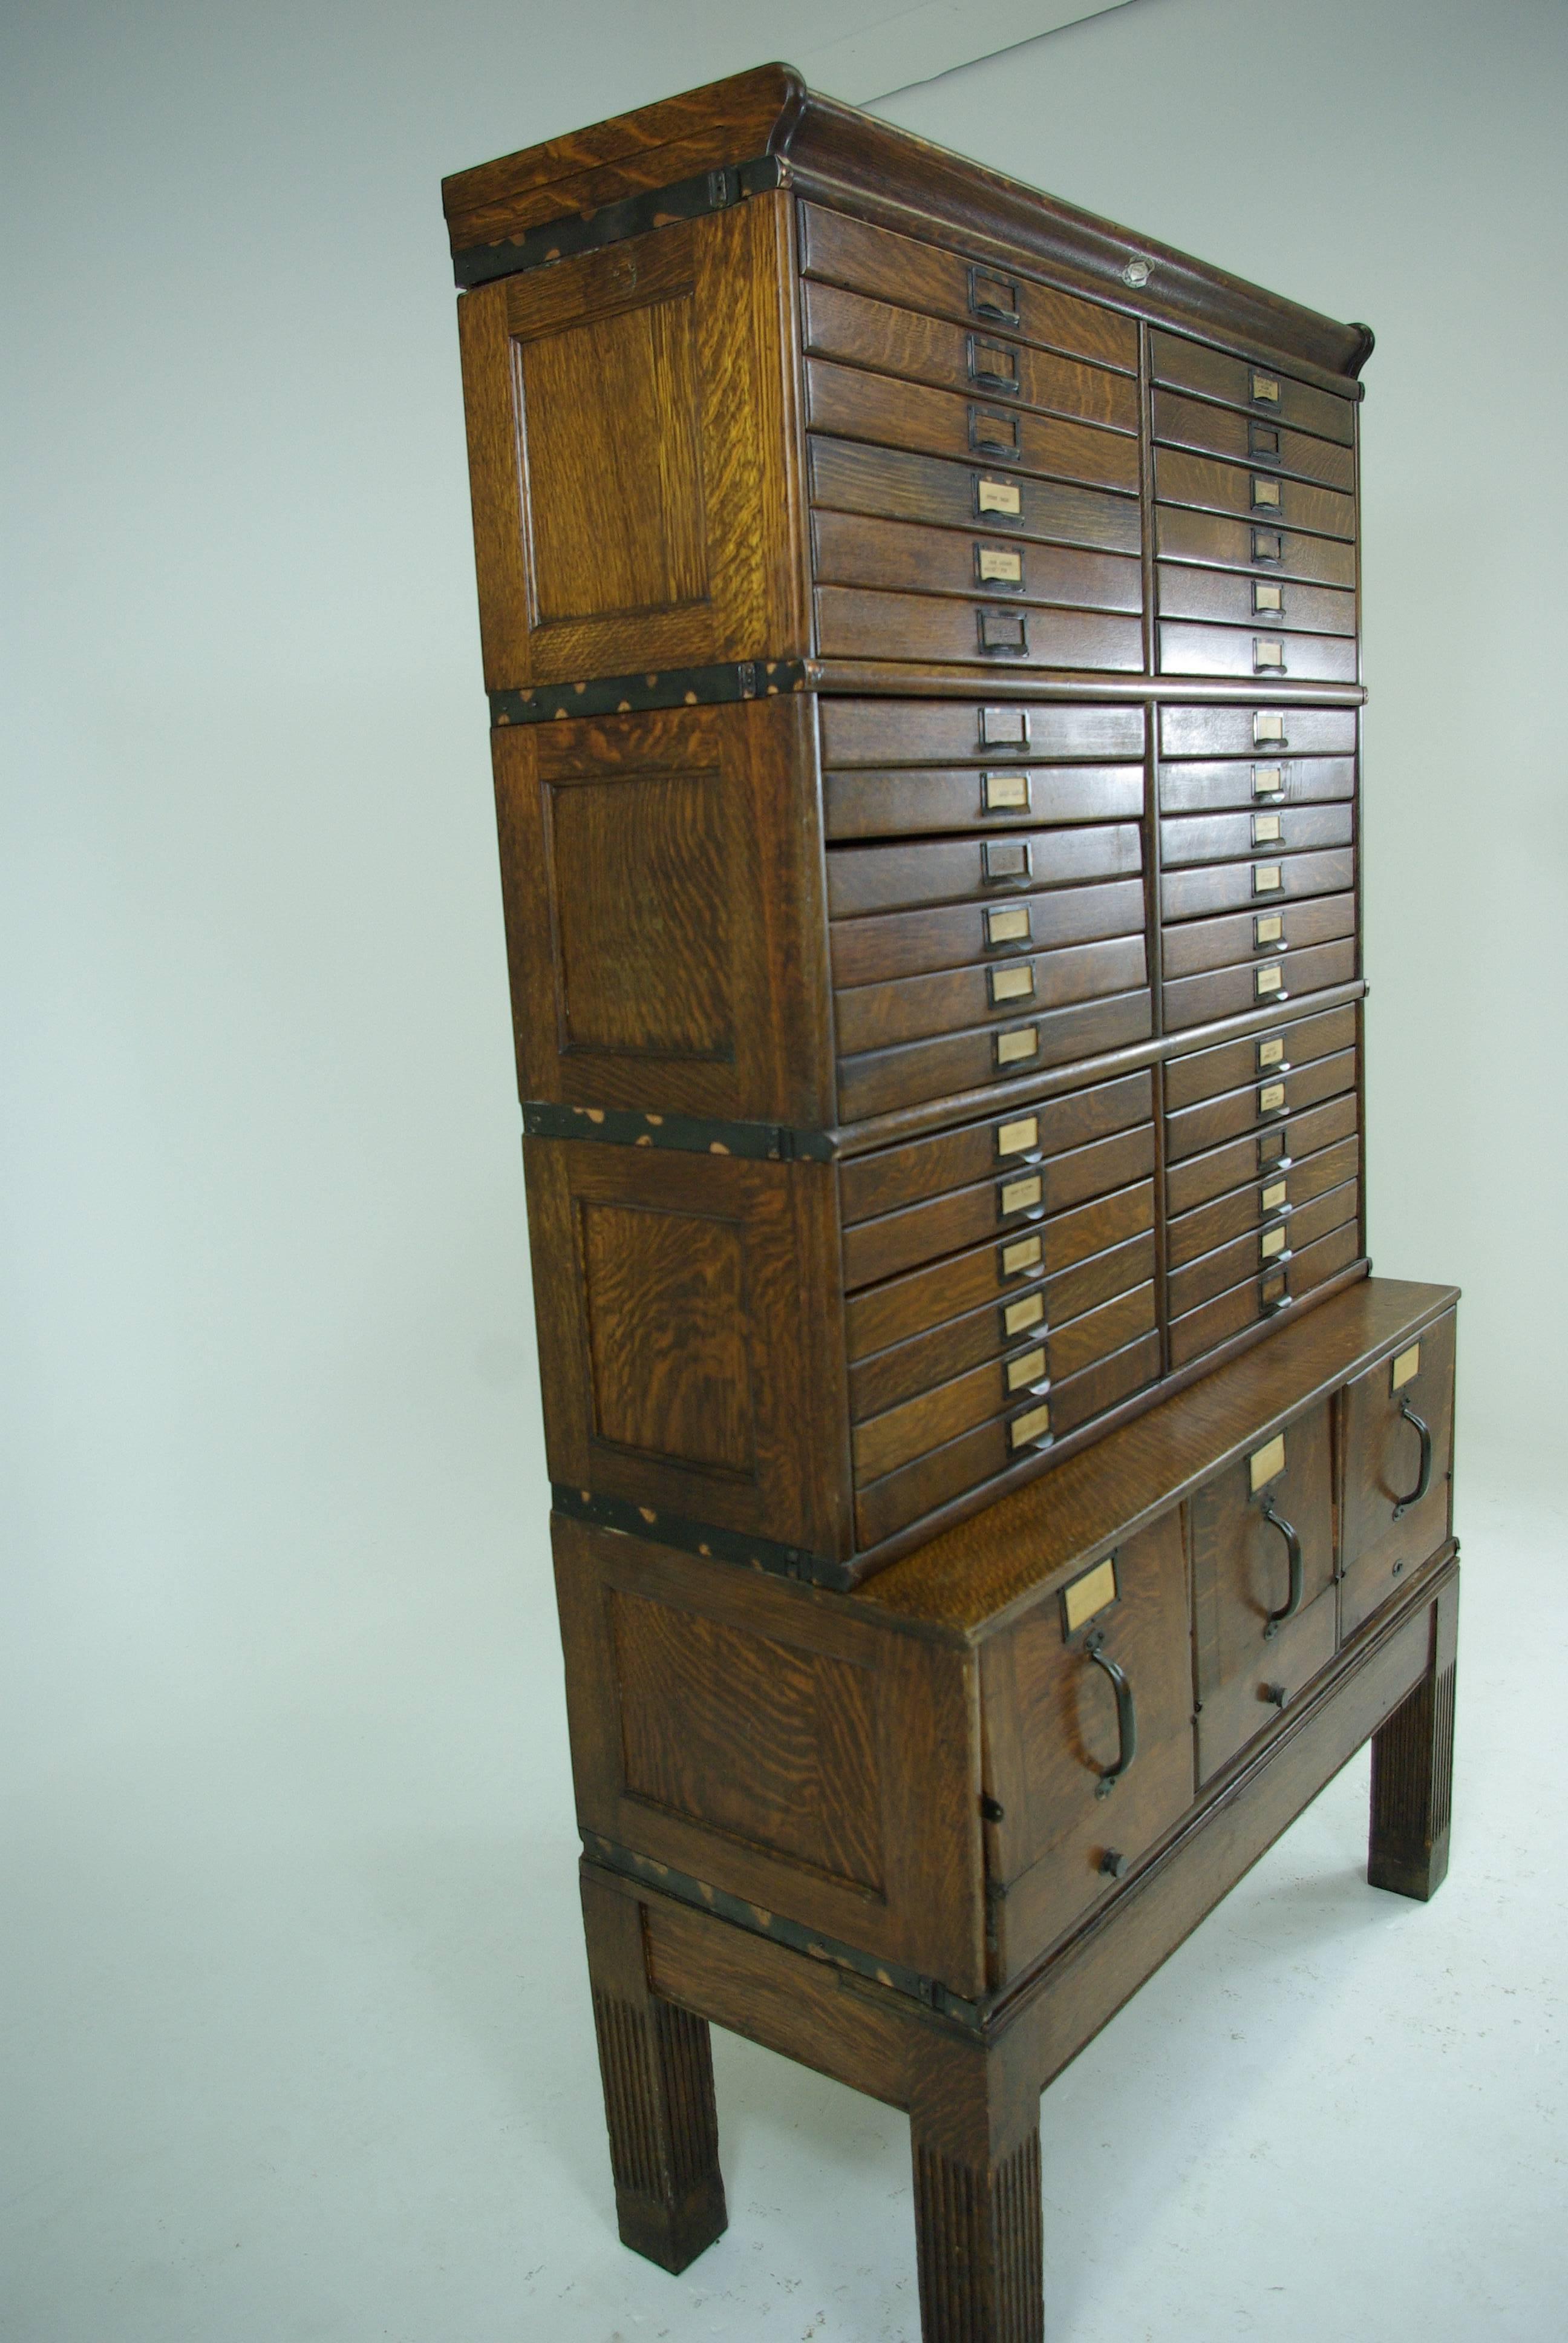 Canada, 1920.
Quarter sawn oak.
Original finish.
Cabinet comes in three main sections plus top and base.
No damage or repair.
Missing single rod on file drawer.

$2950.

Lot B-275.
Measures: 41 1/2